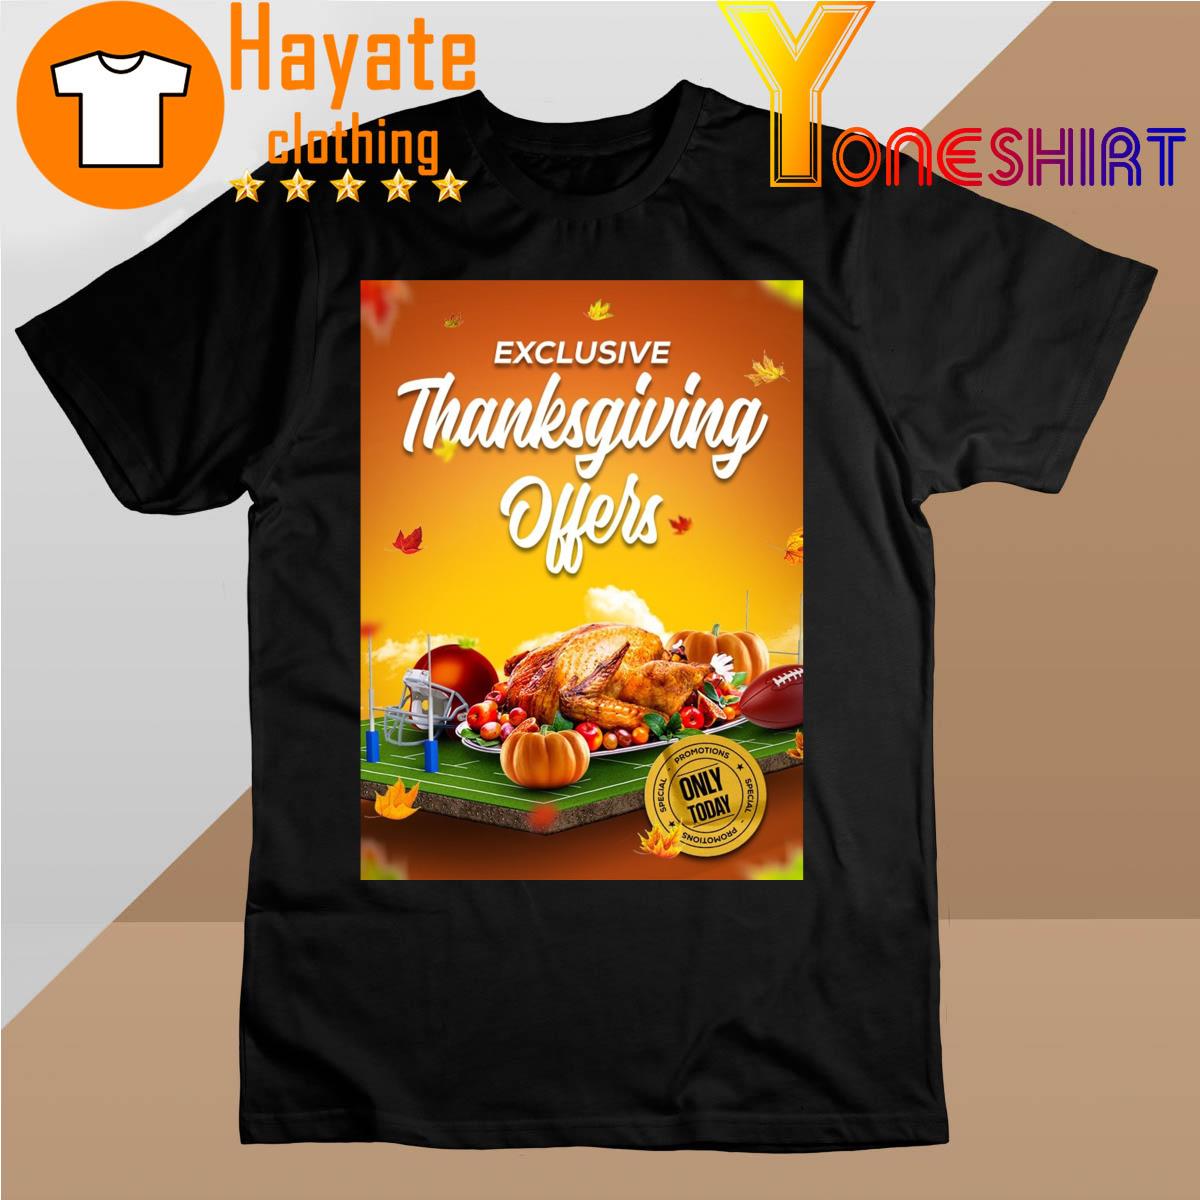 Exclusive Thanksgiving Offers shirt